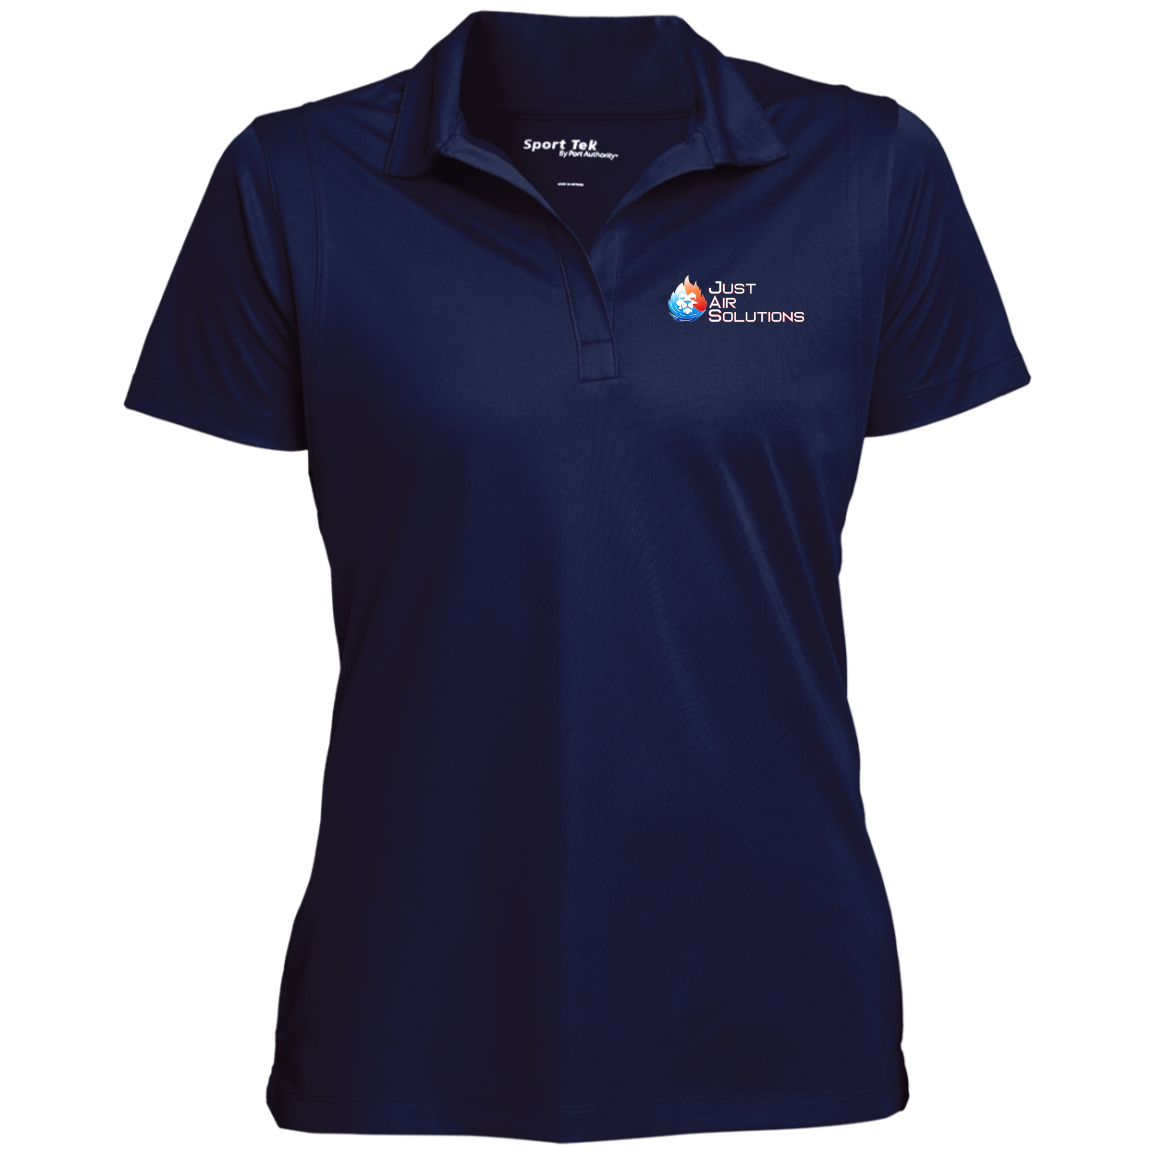 JUST AIR SOLUTIONS Ladies' Micropique Sport-Wick® Polo